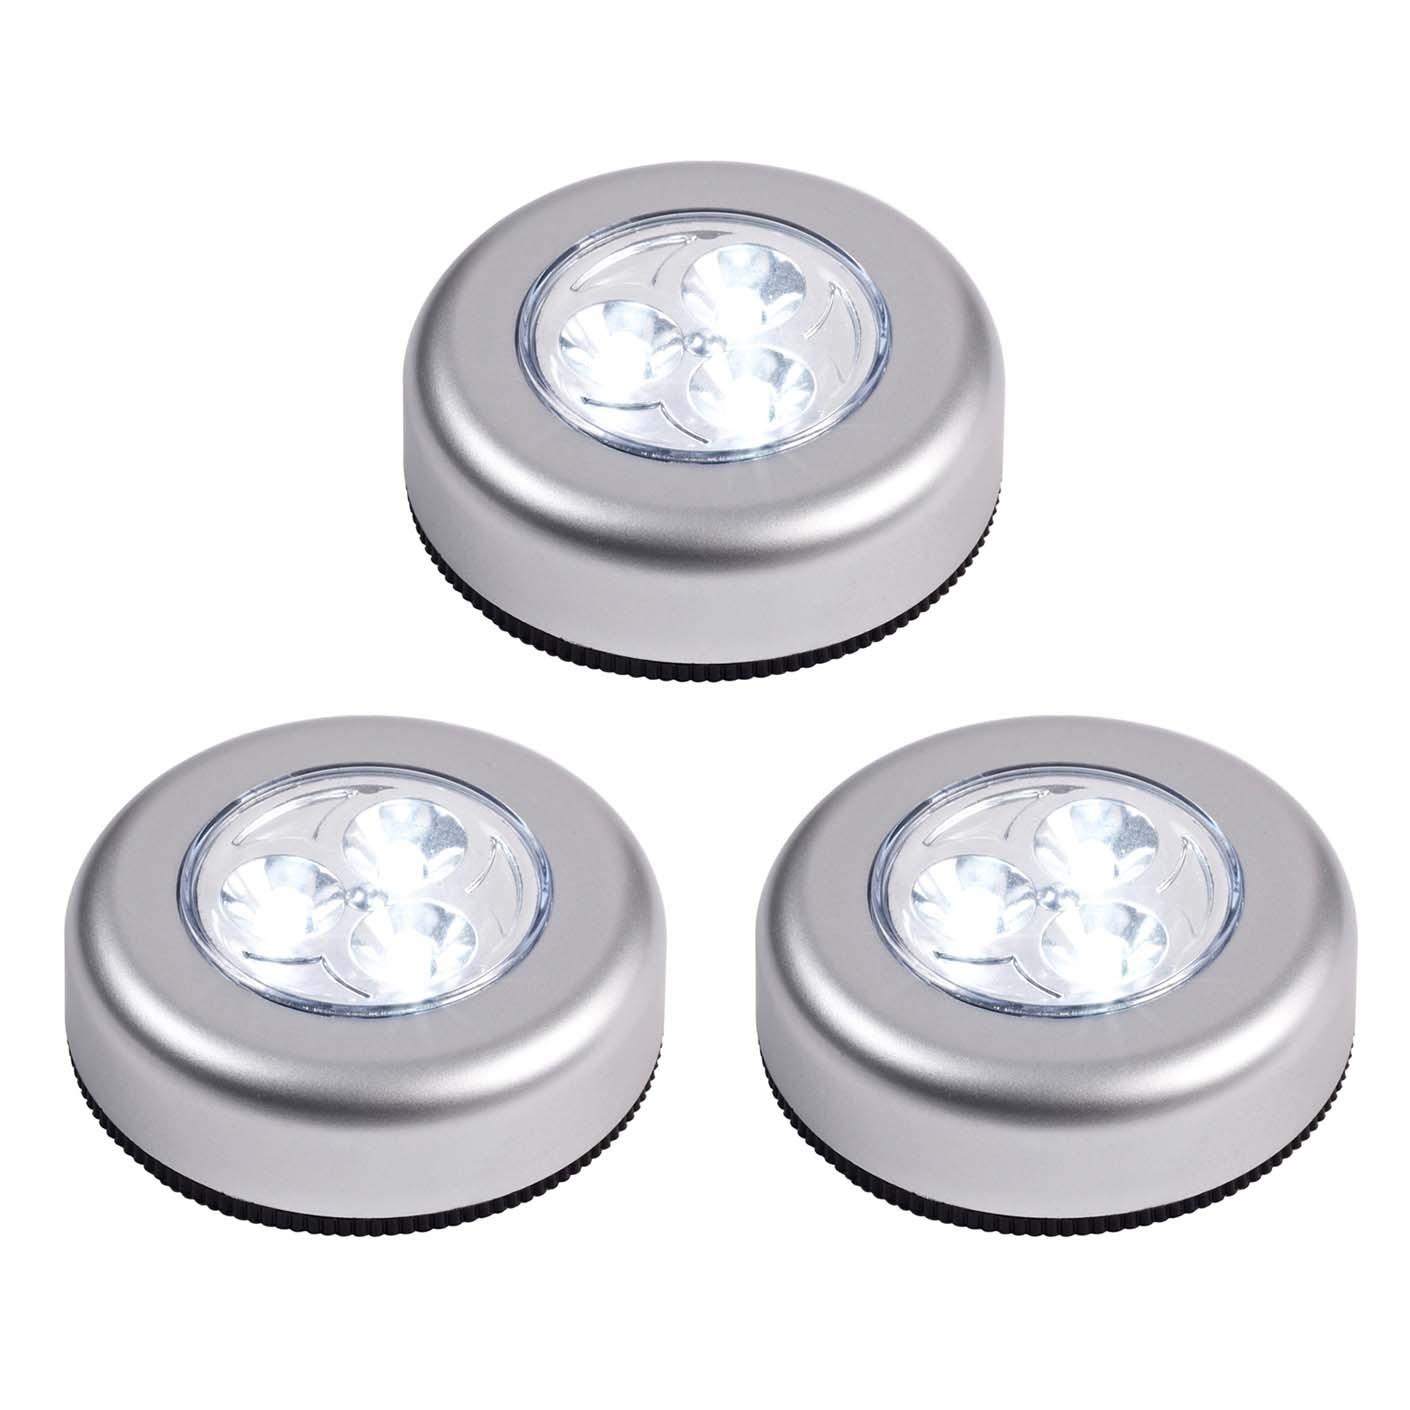 ll13002-battery-operated-push-light-with-3m-adhesive-pad_p1_1.jpg